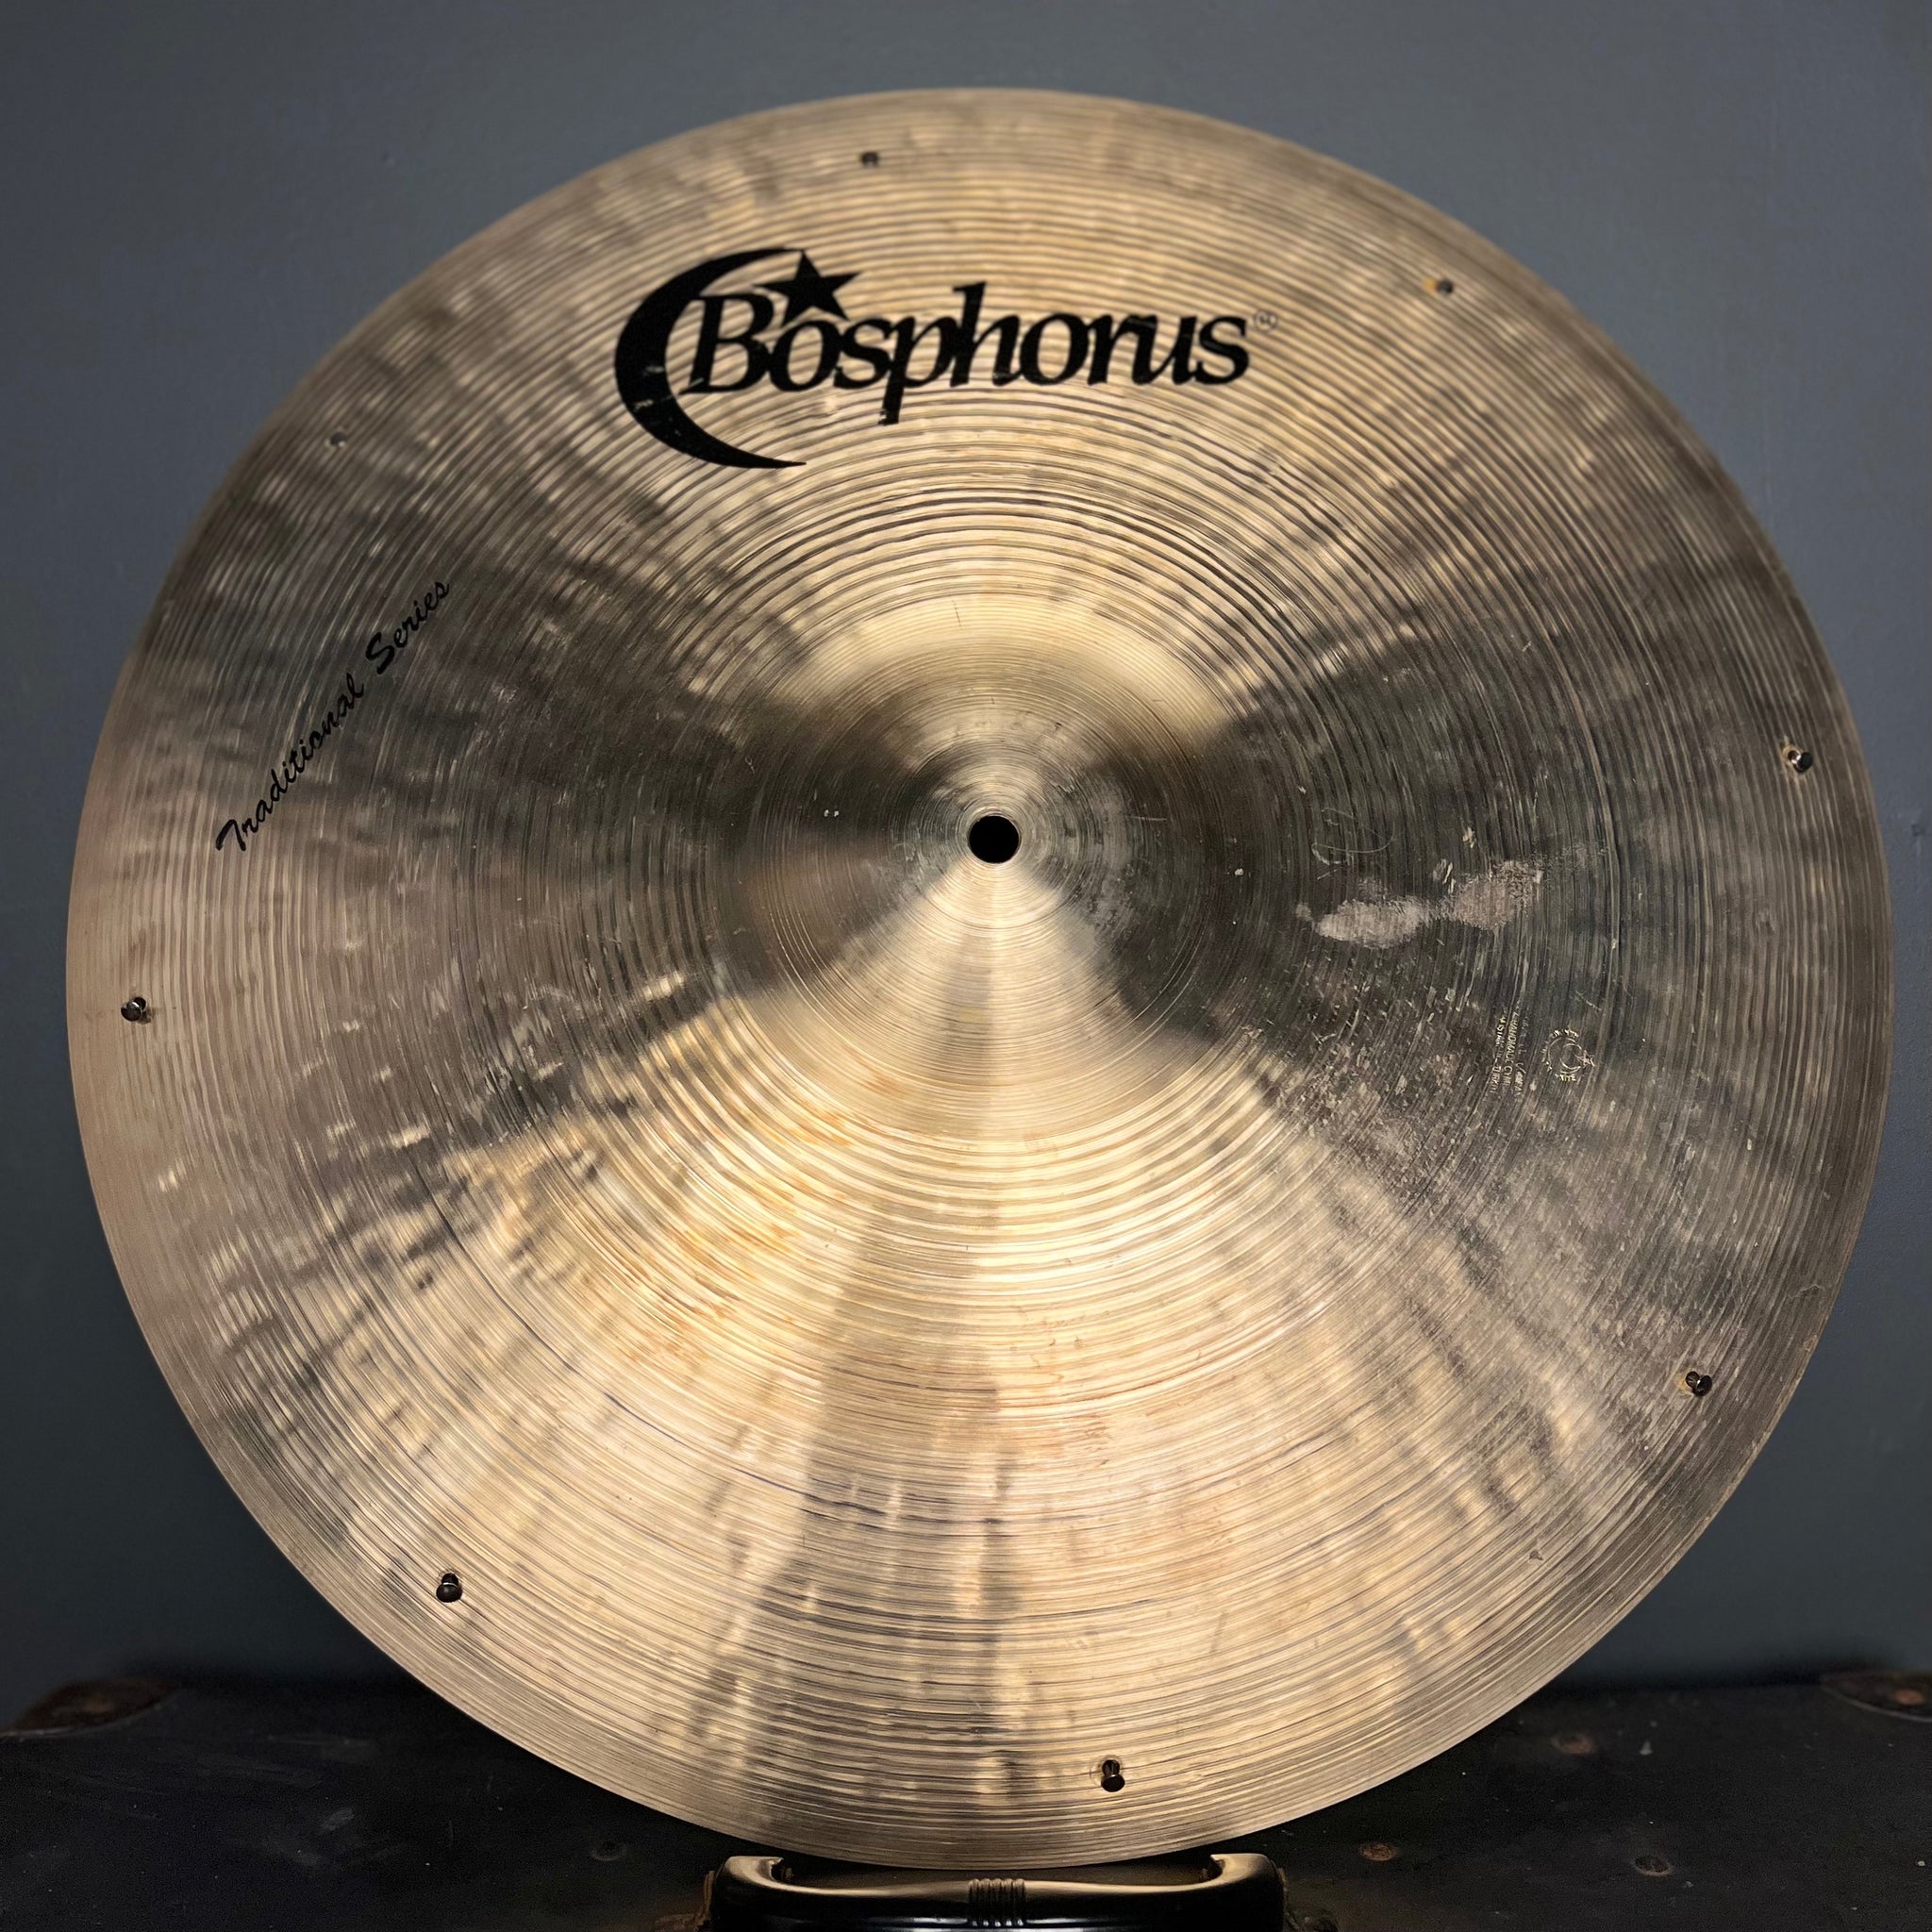 USED Bosphorus 20" Traditional Thin Ride with Eight Rivets - 1867g